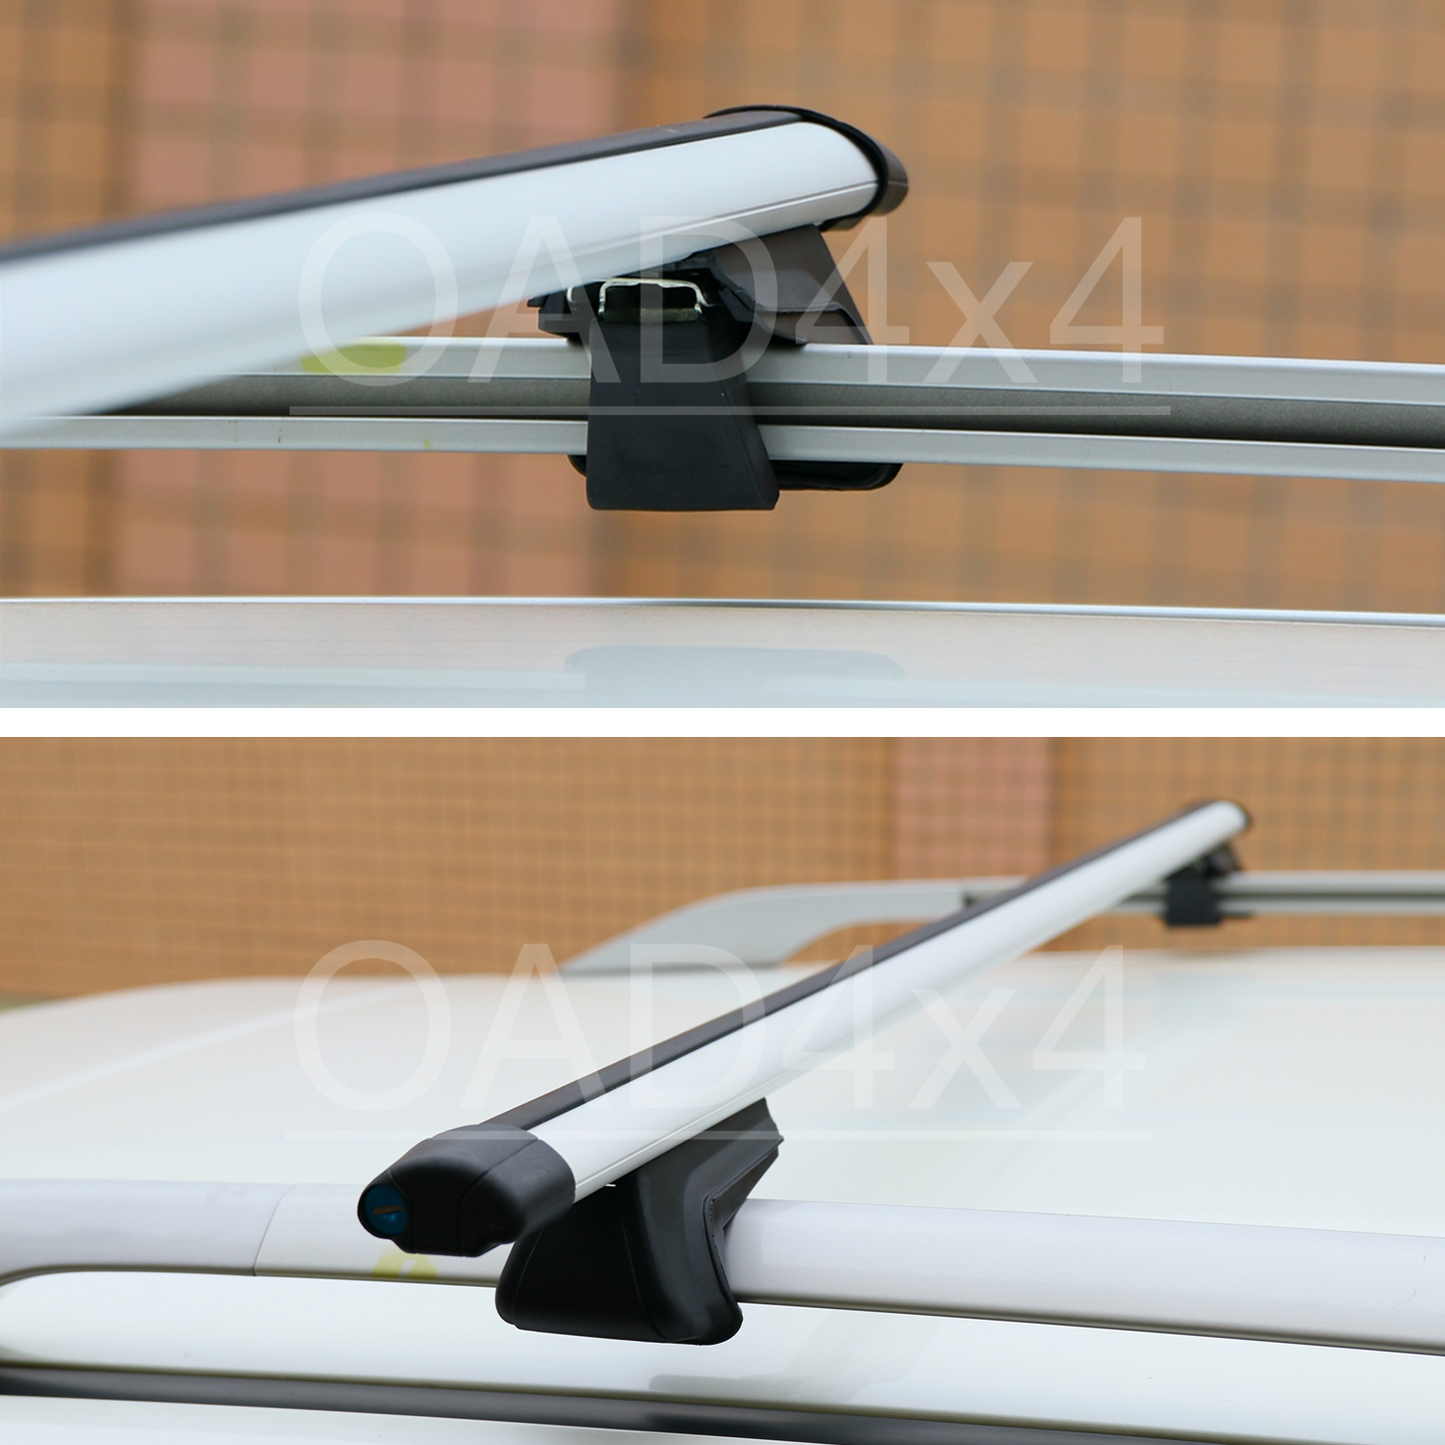 1 Pair Aluminum Silver Cross Bar Roof Racks Baggage holder for Mercedes-Benz GLB-Class GLB200 2020+ with raised roof rail